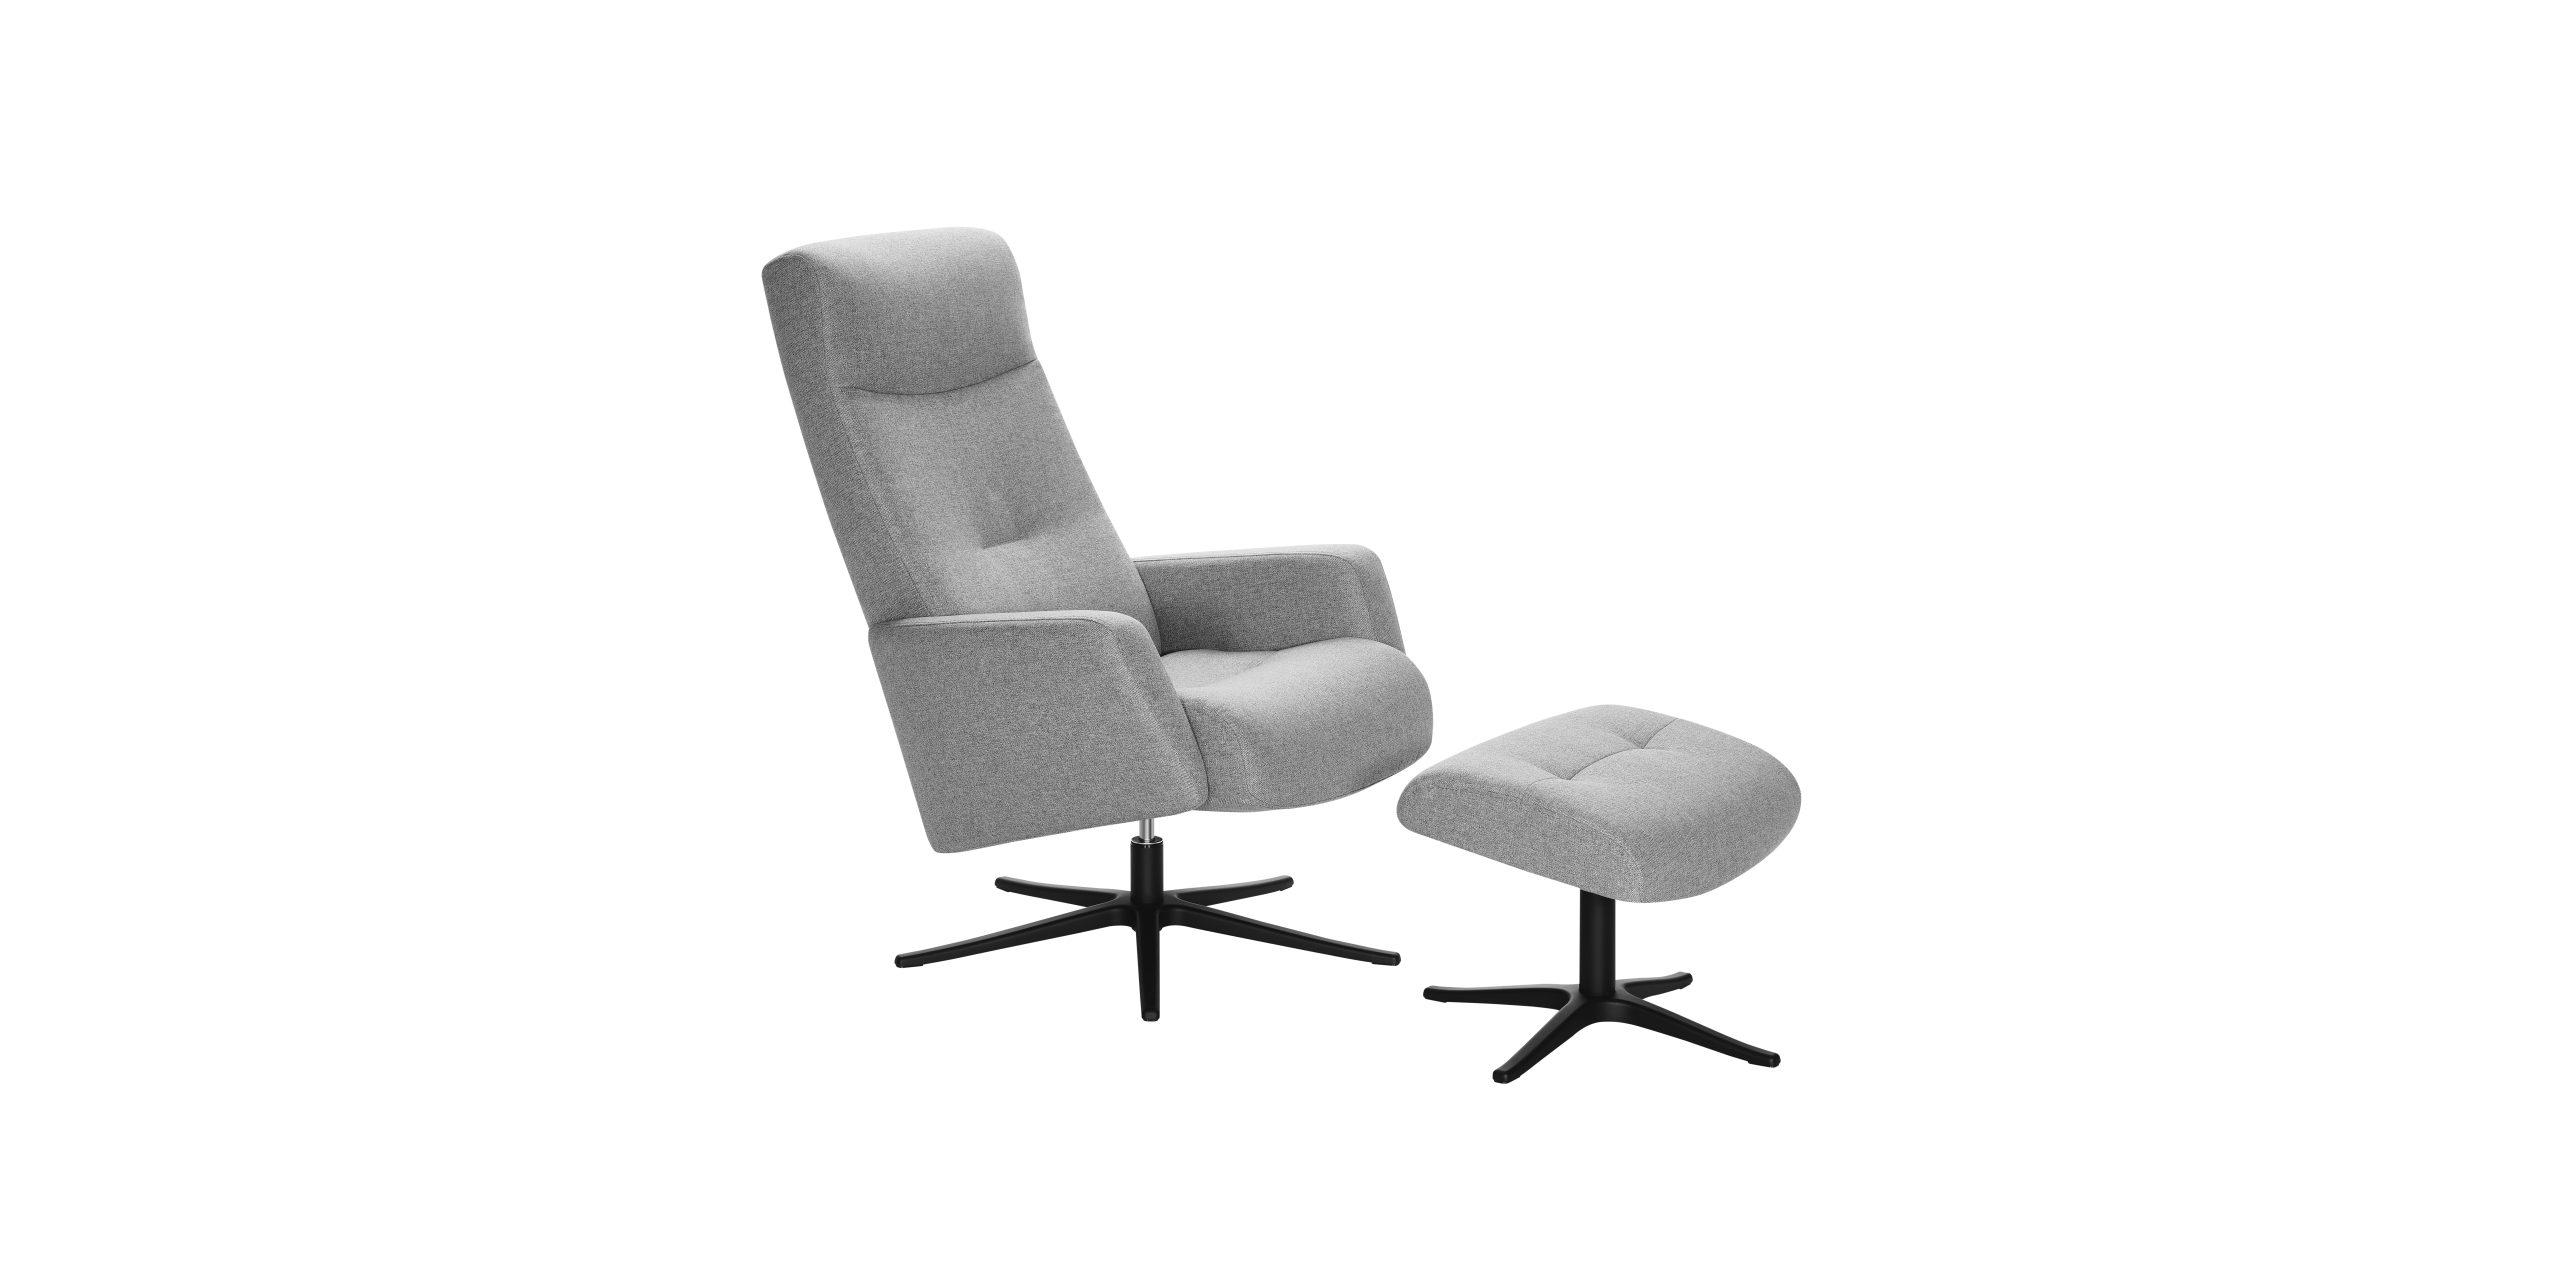 Slider Fauteuil relaxation et repose pieds LEENA 2100 SP (image 5)